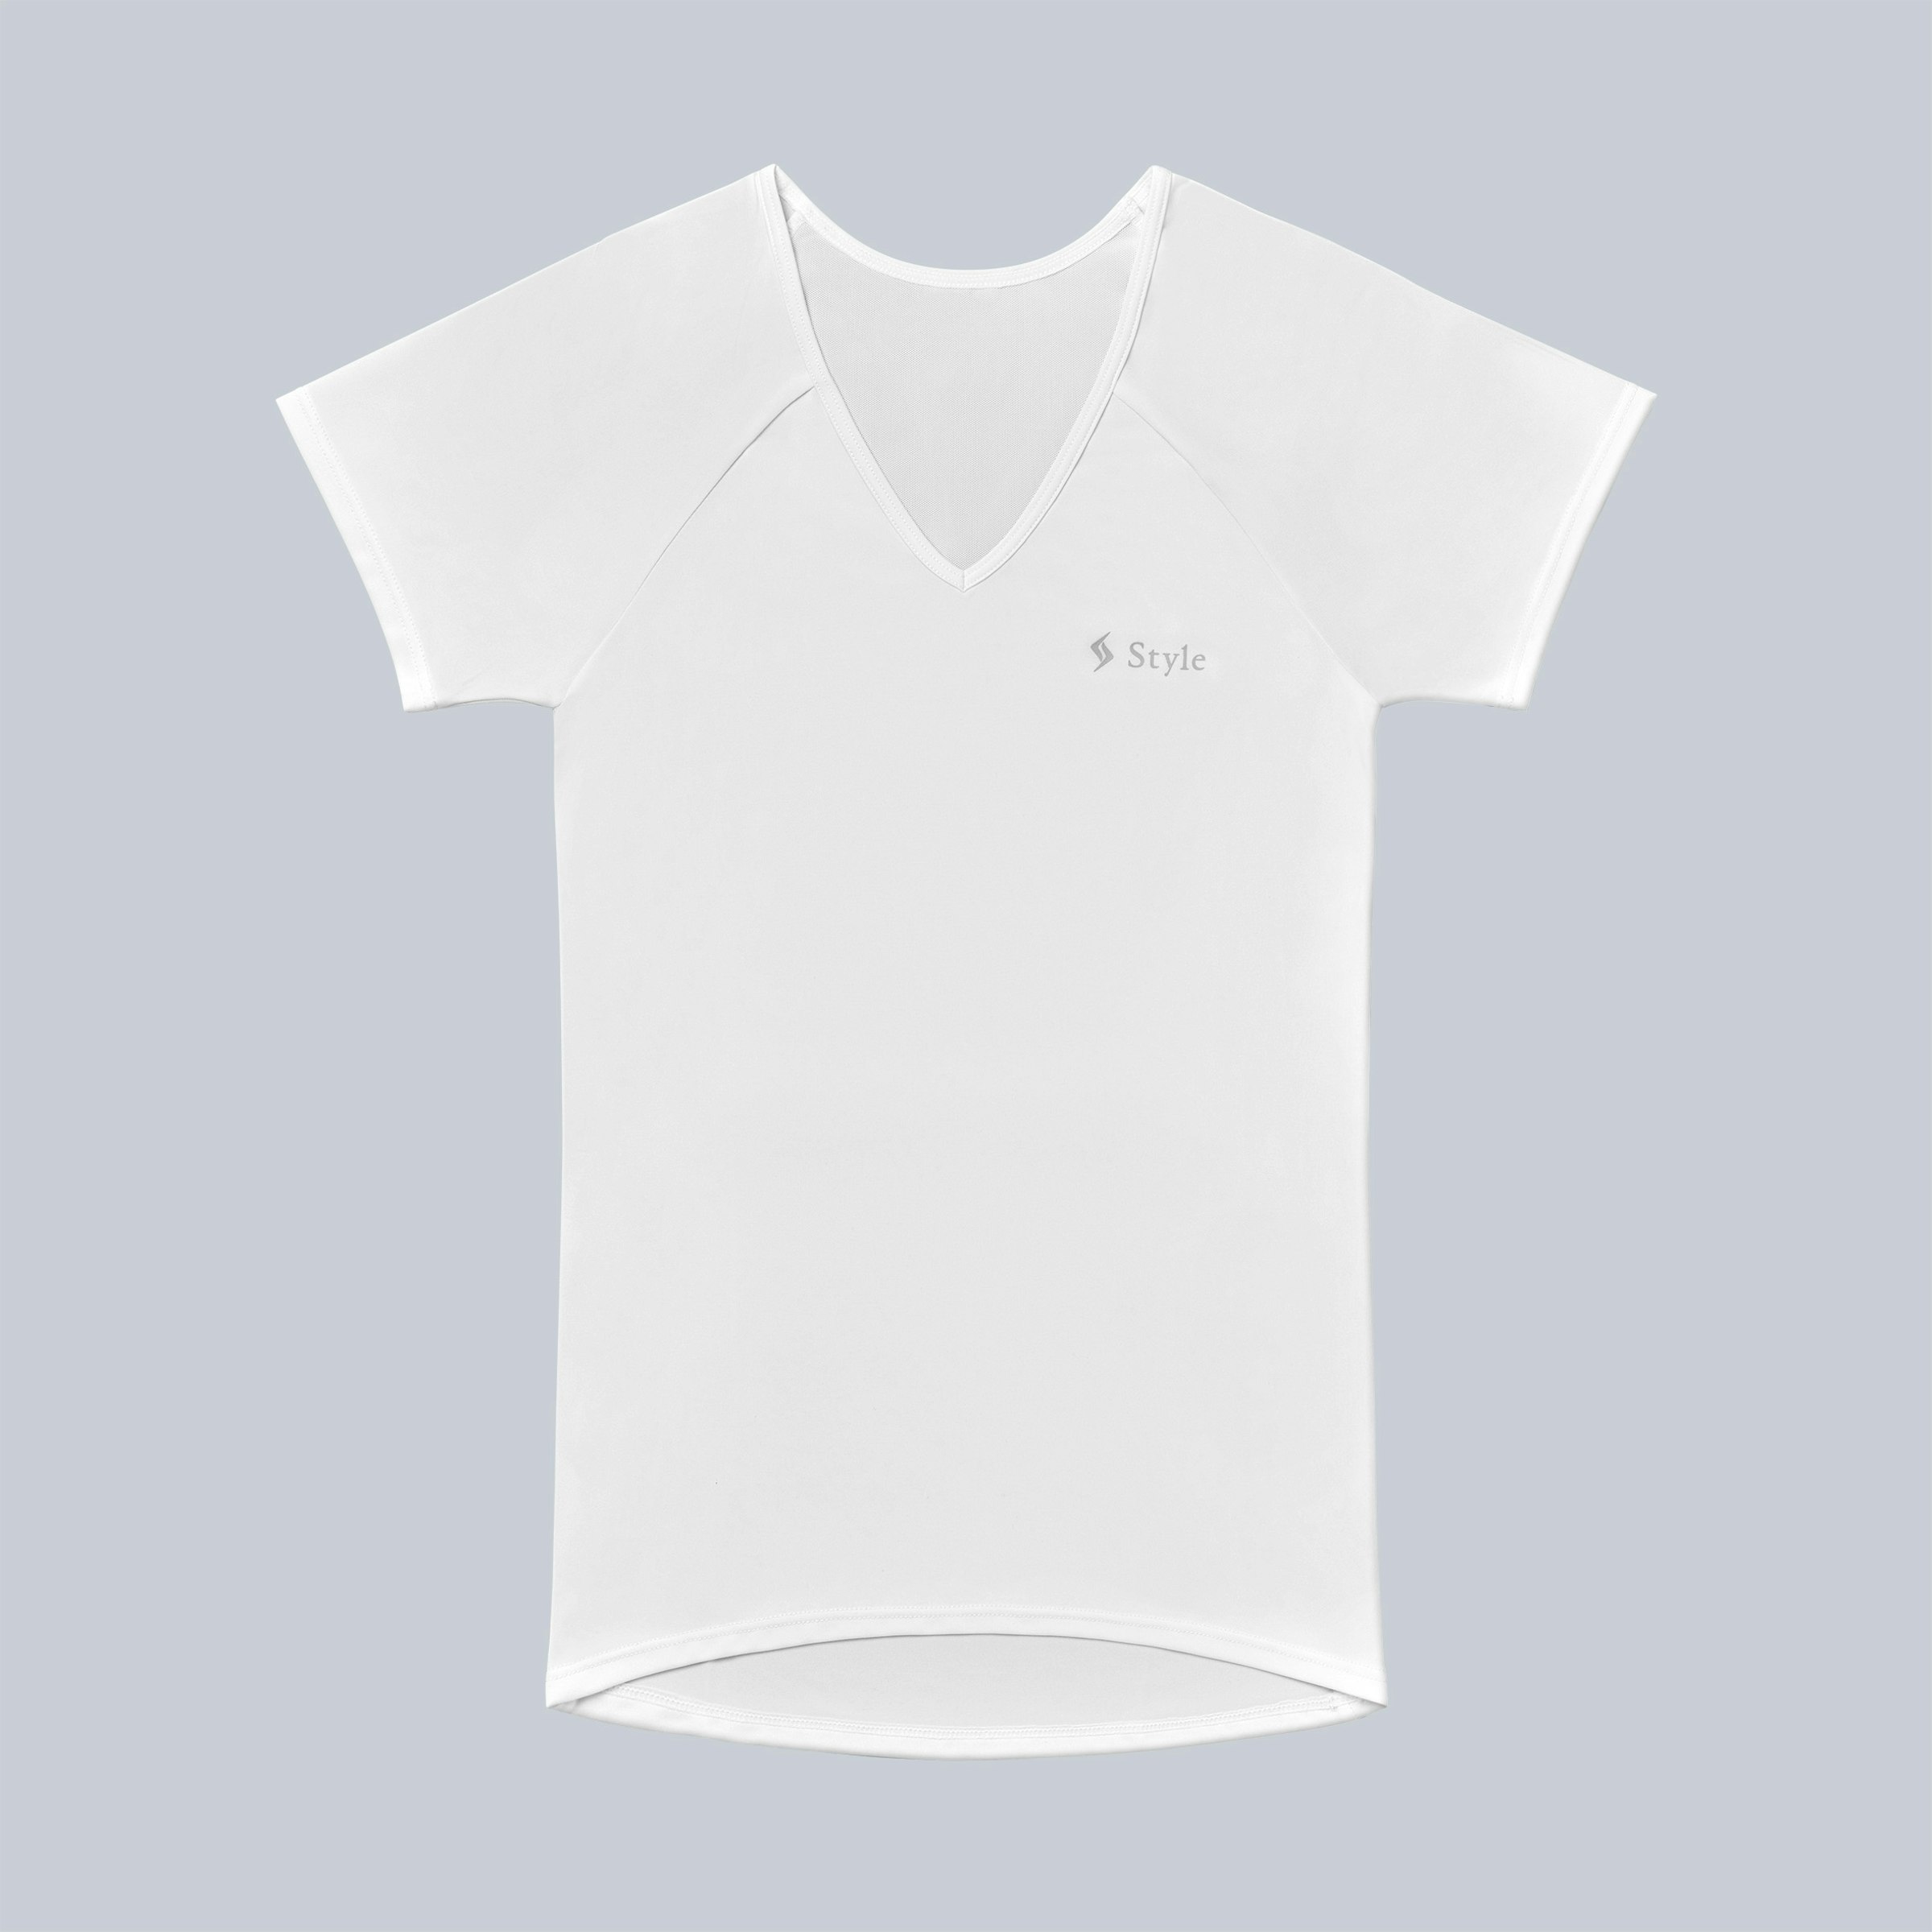 Men's V-neck in 2 colors – white and black. 3,480 yen (tax included)